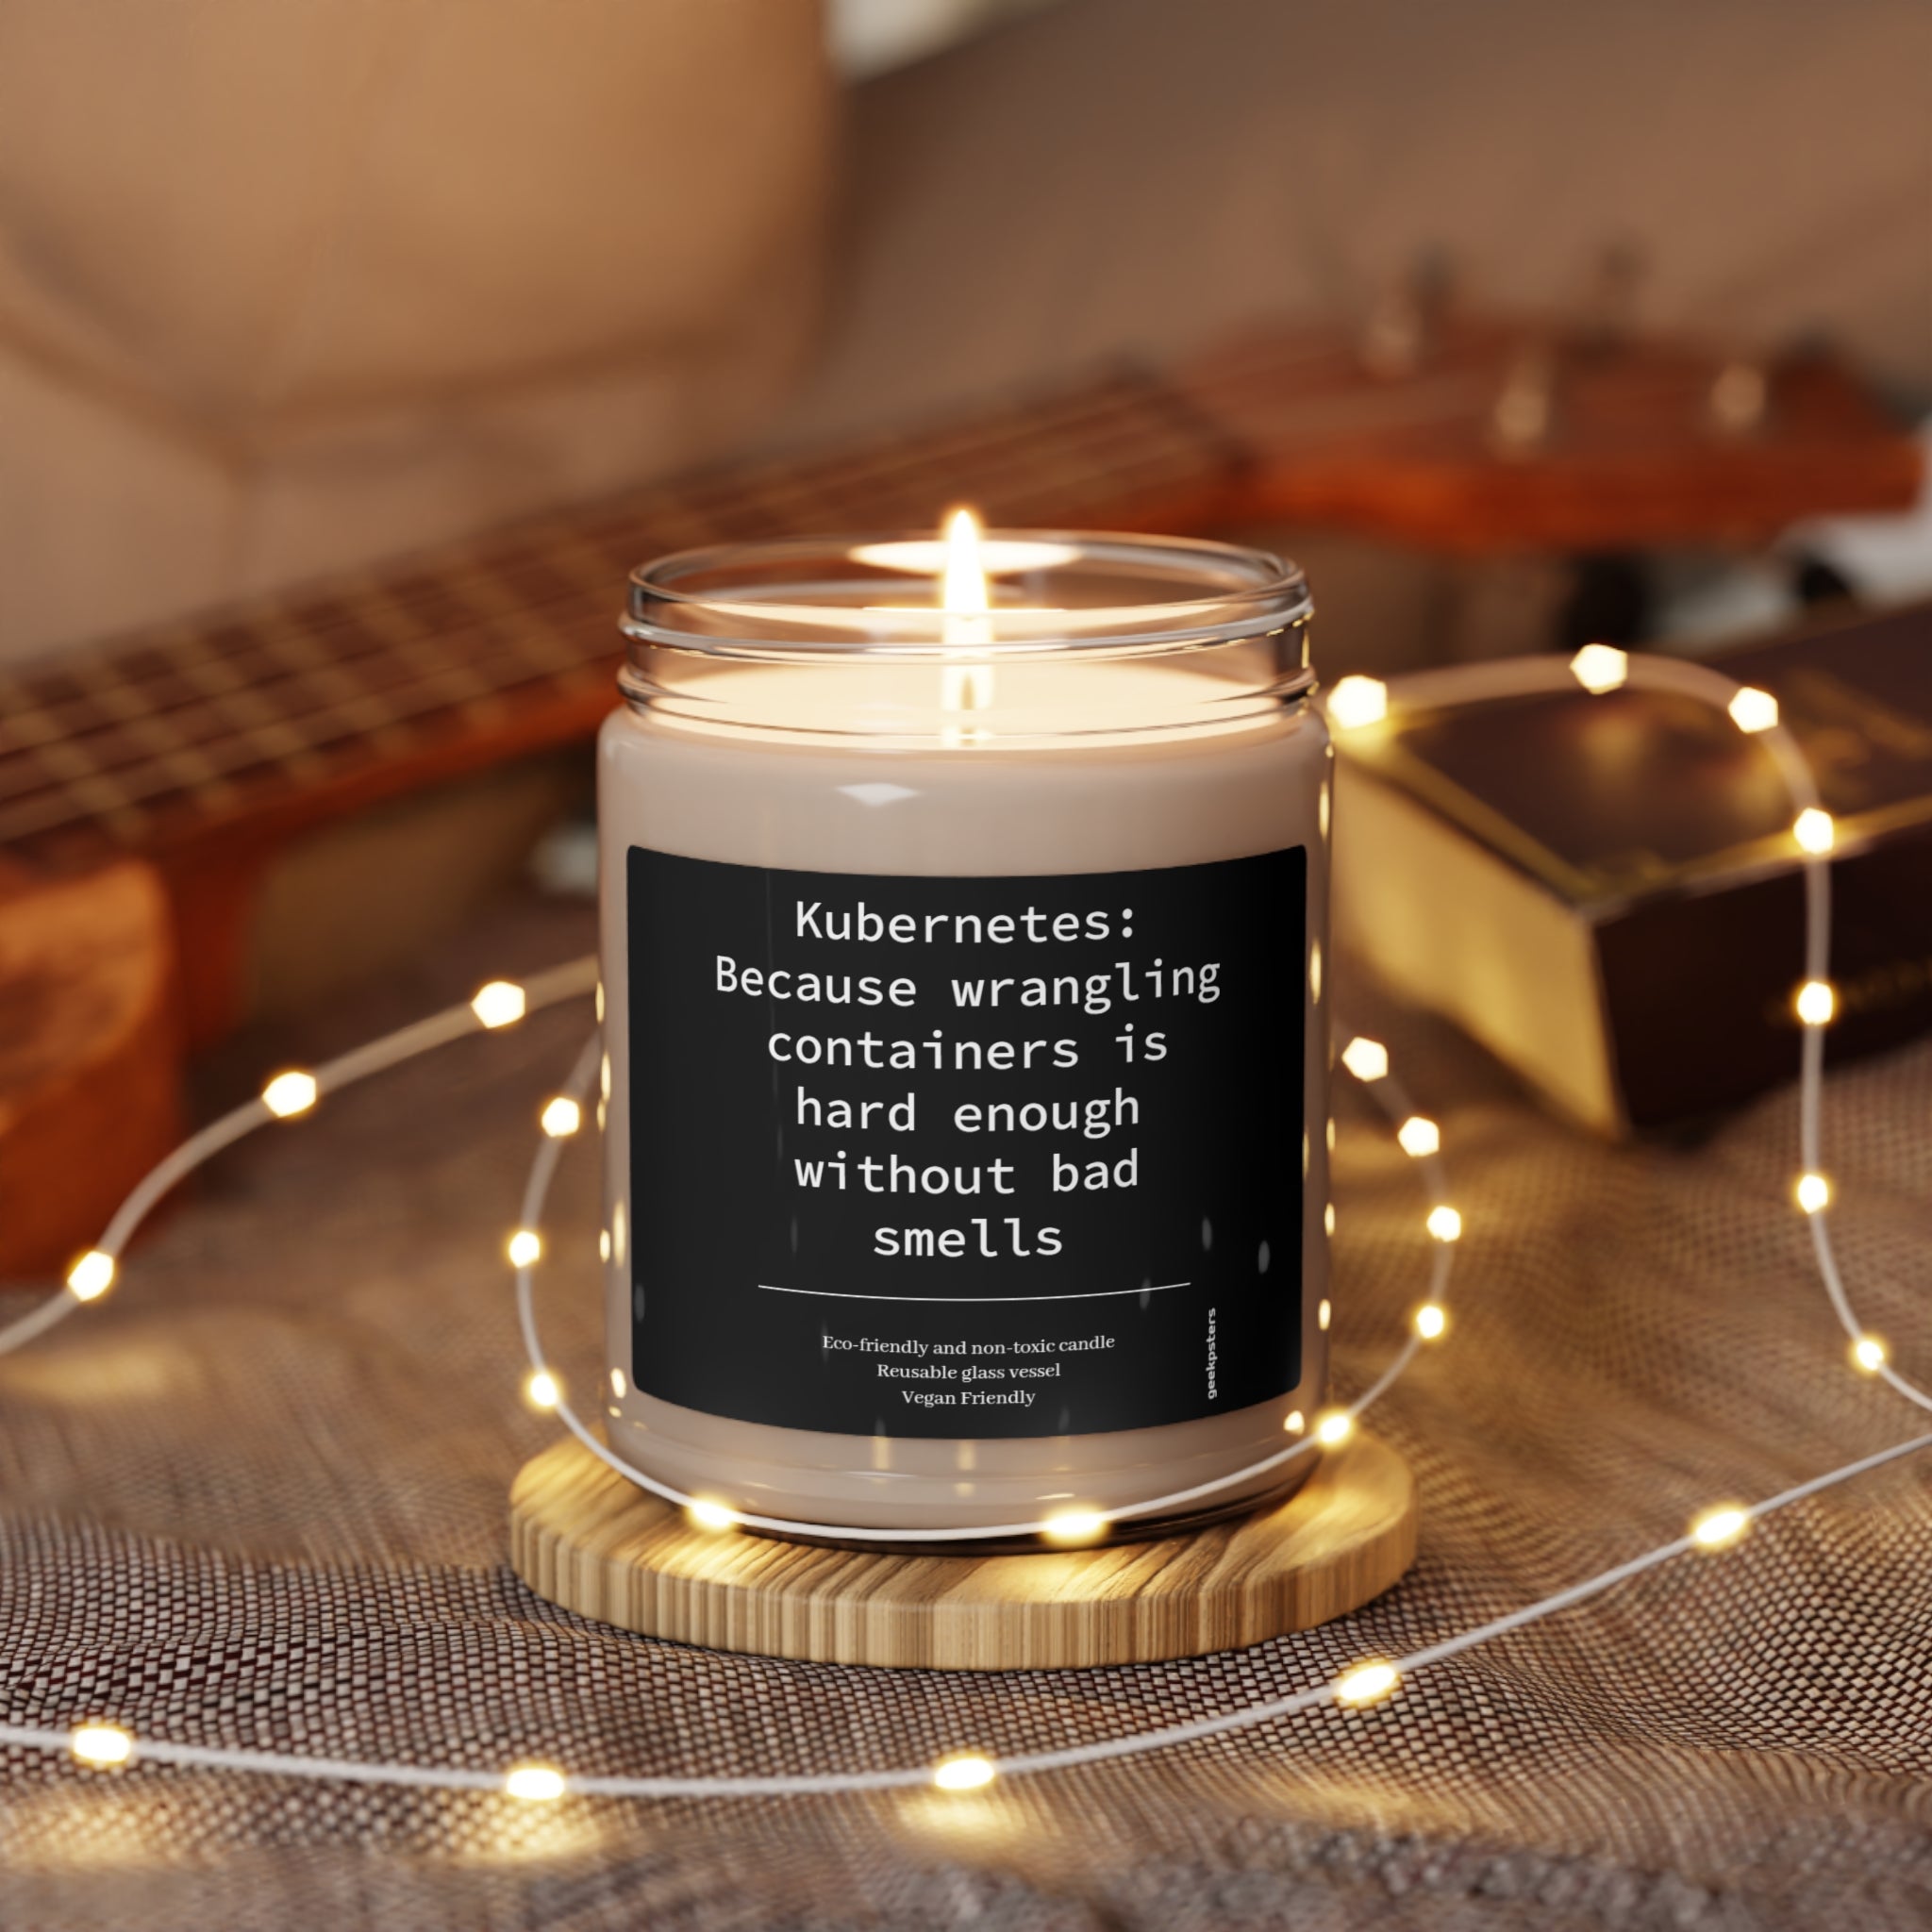 A Container Candle - Scented Soy Candle, 9oz with a humorous label that reads "kubernetes: because wrangling containers is hard enough without bad smells" placed on a wooden surface surrounded by small lights.